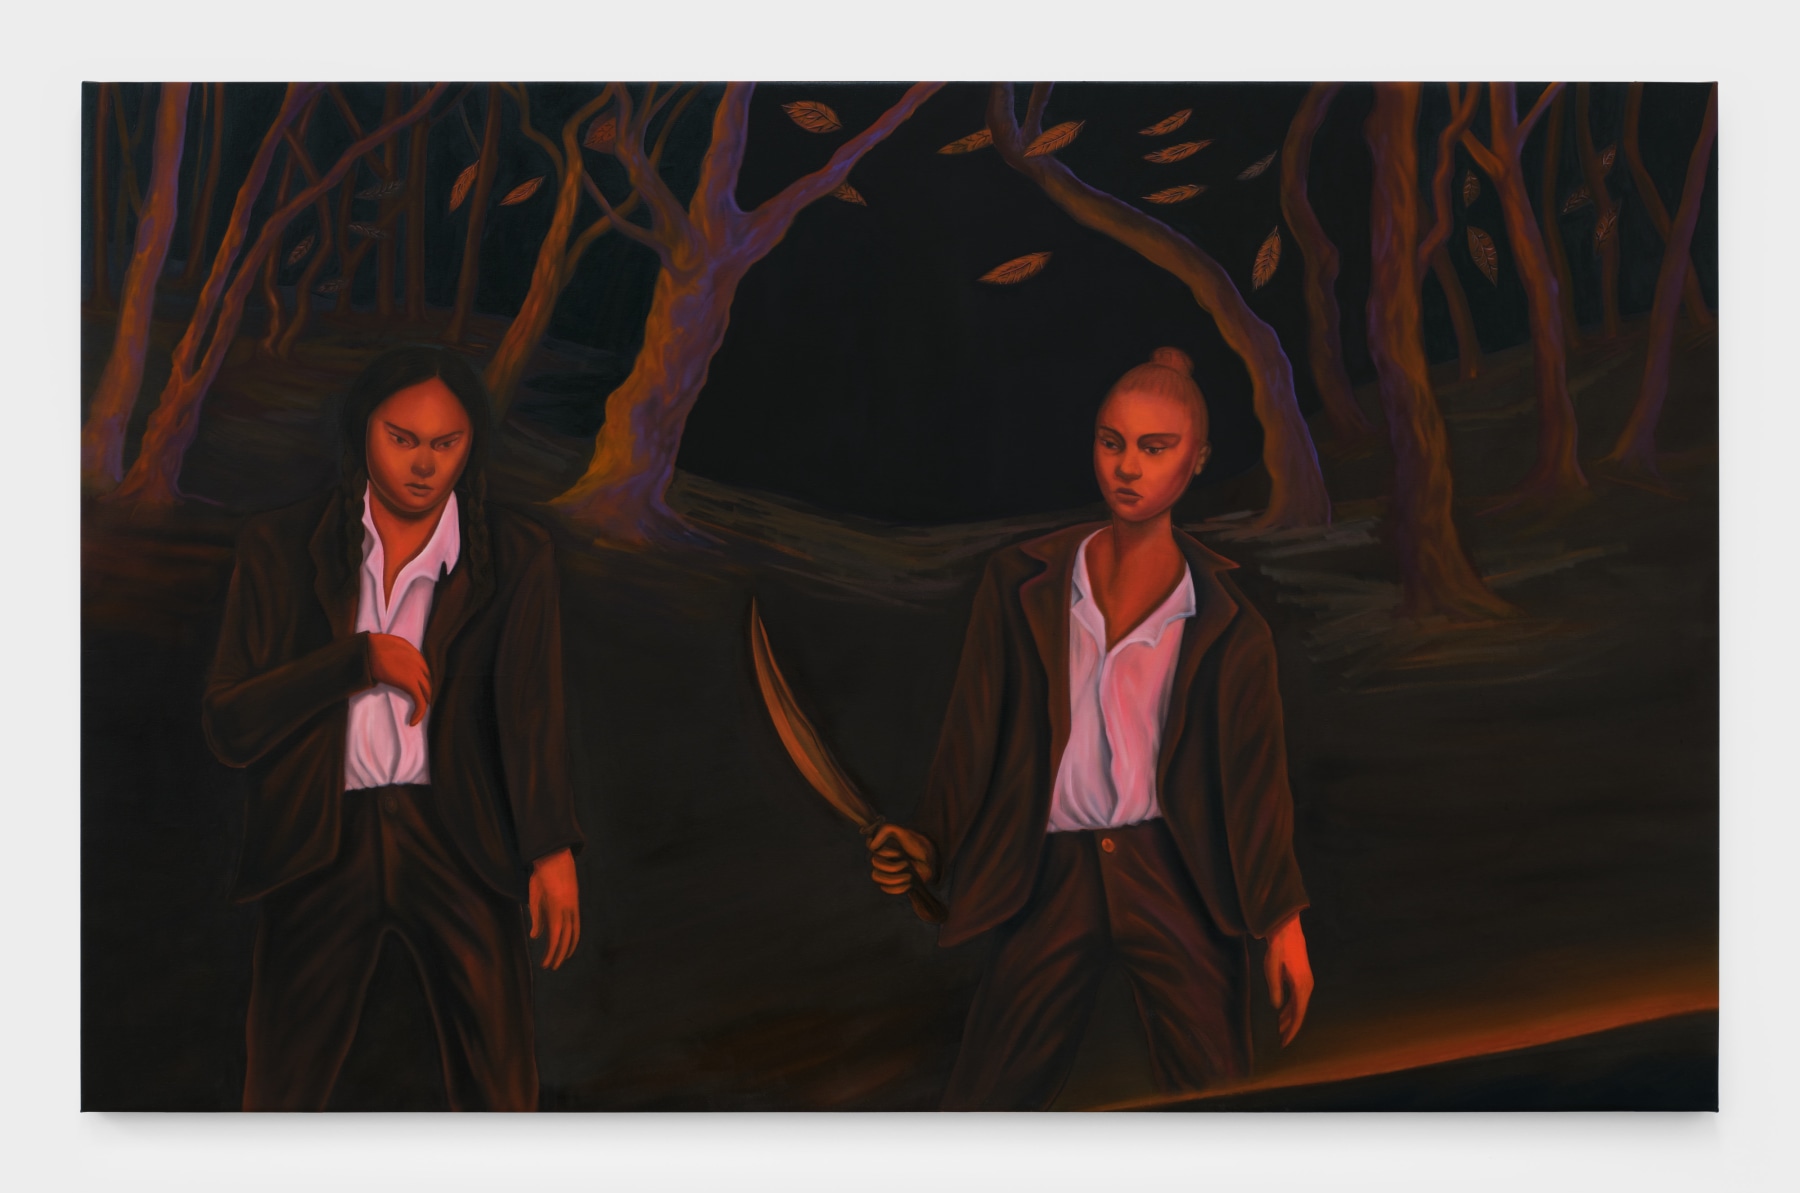 Bambou Gili's artwork "Goodfellas". Two women in loose fitting suits walk through a red glowing forest while one wields a machete. 47 x 75 3/4 in (119.4 x 192.4 cm), oil on linen, 2022